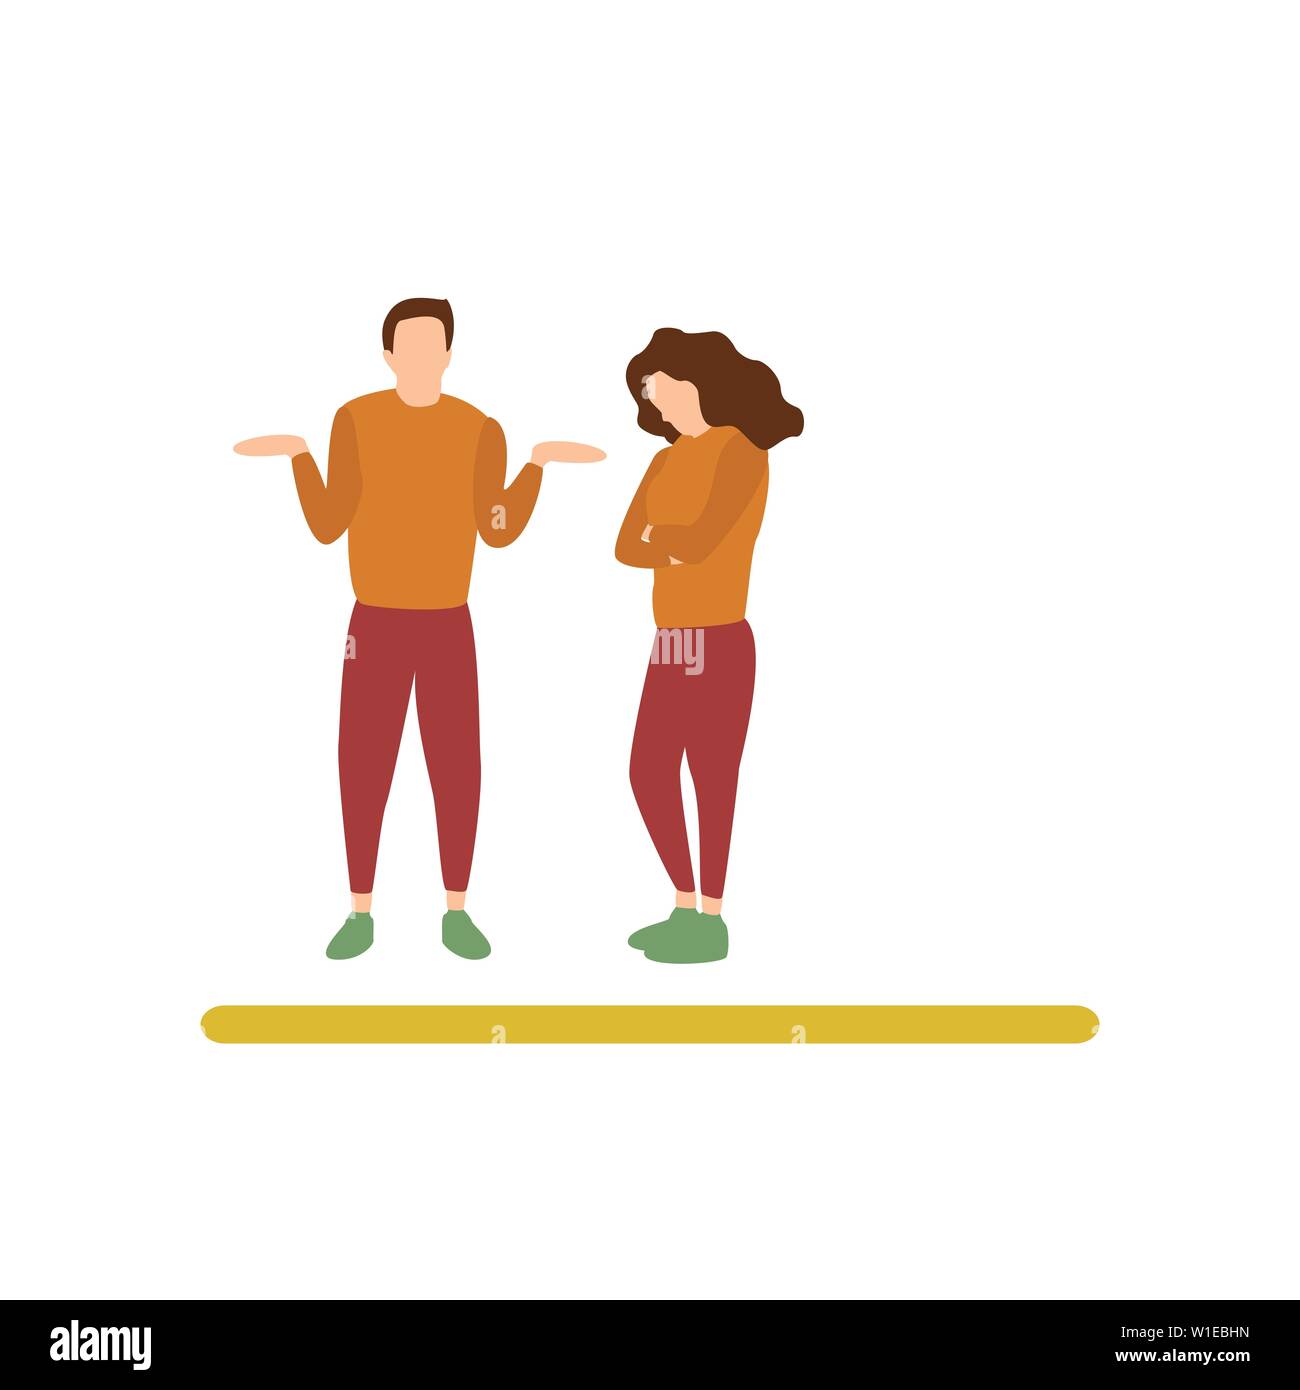 Flat Design of a Woman Disappointed to a Man, Human Activities Expression Stock Vector